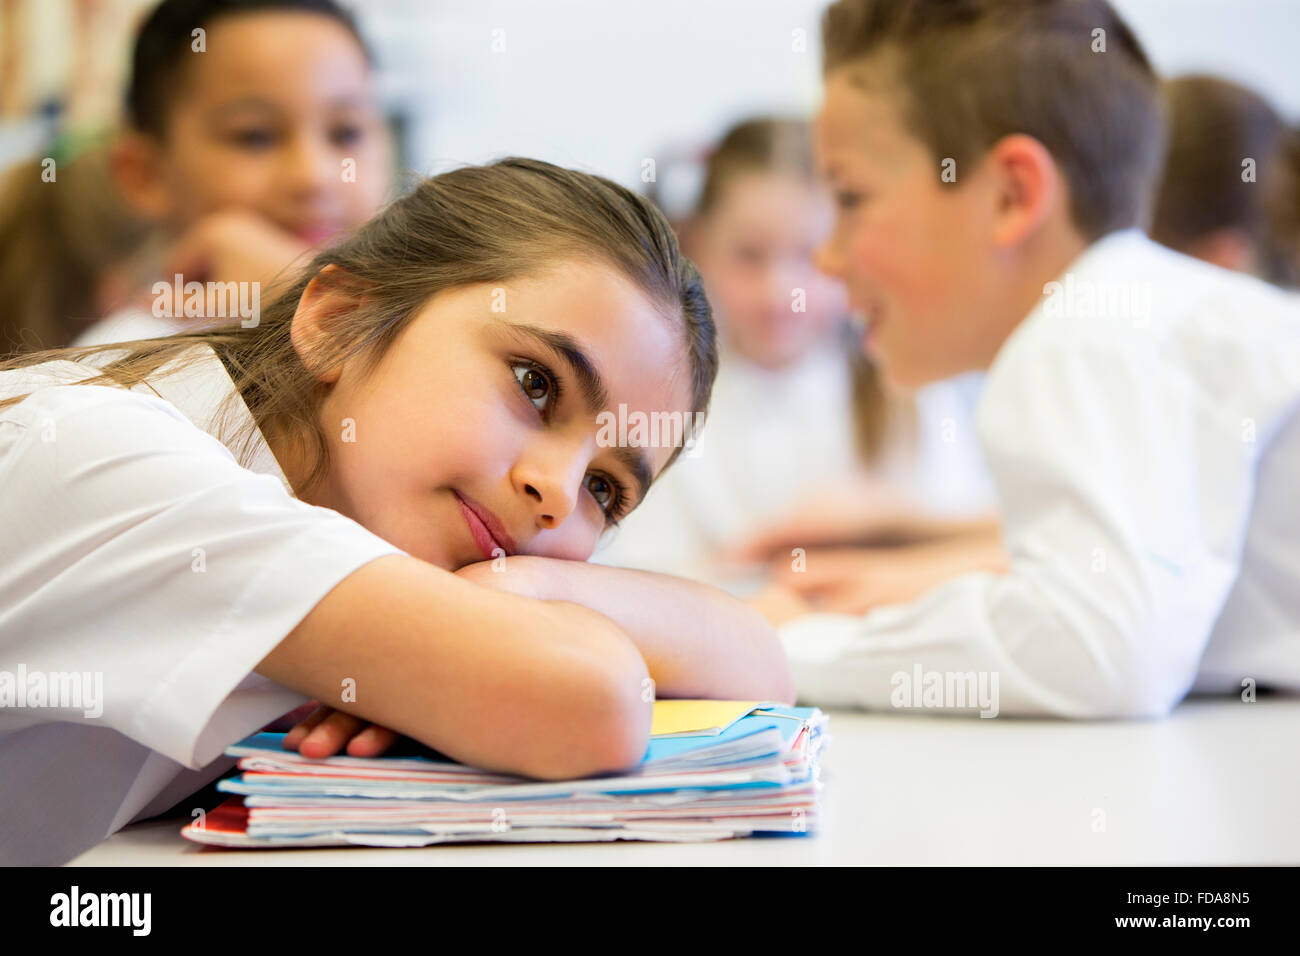 A close up shot of a little girl at school who looks distant and upset. Stock Photo